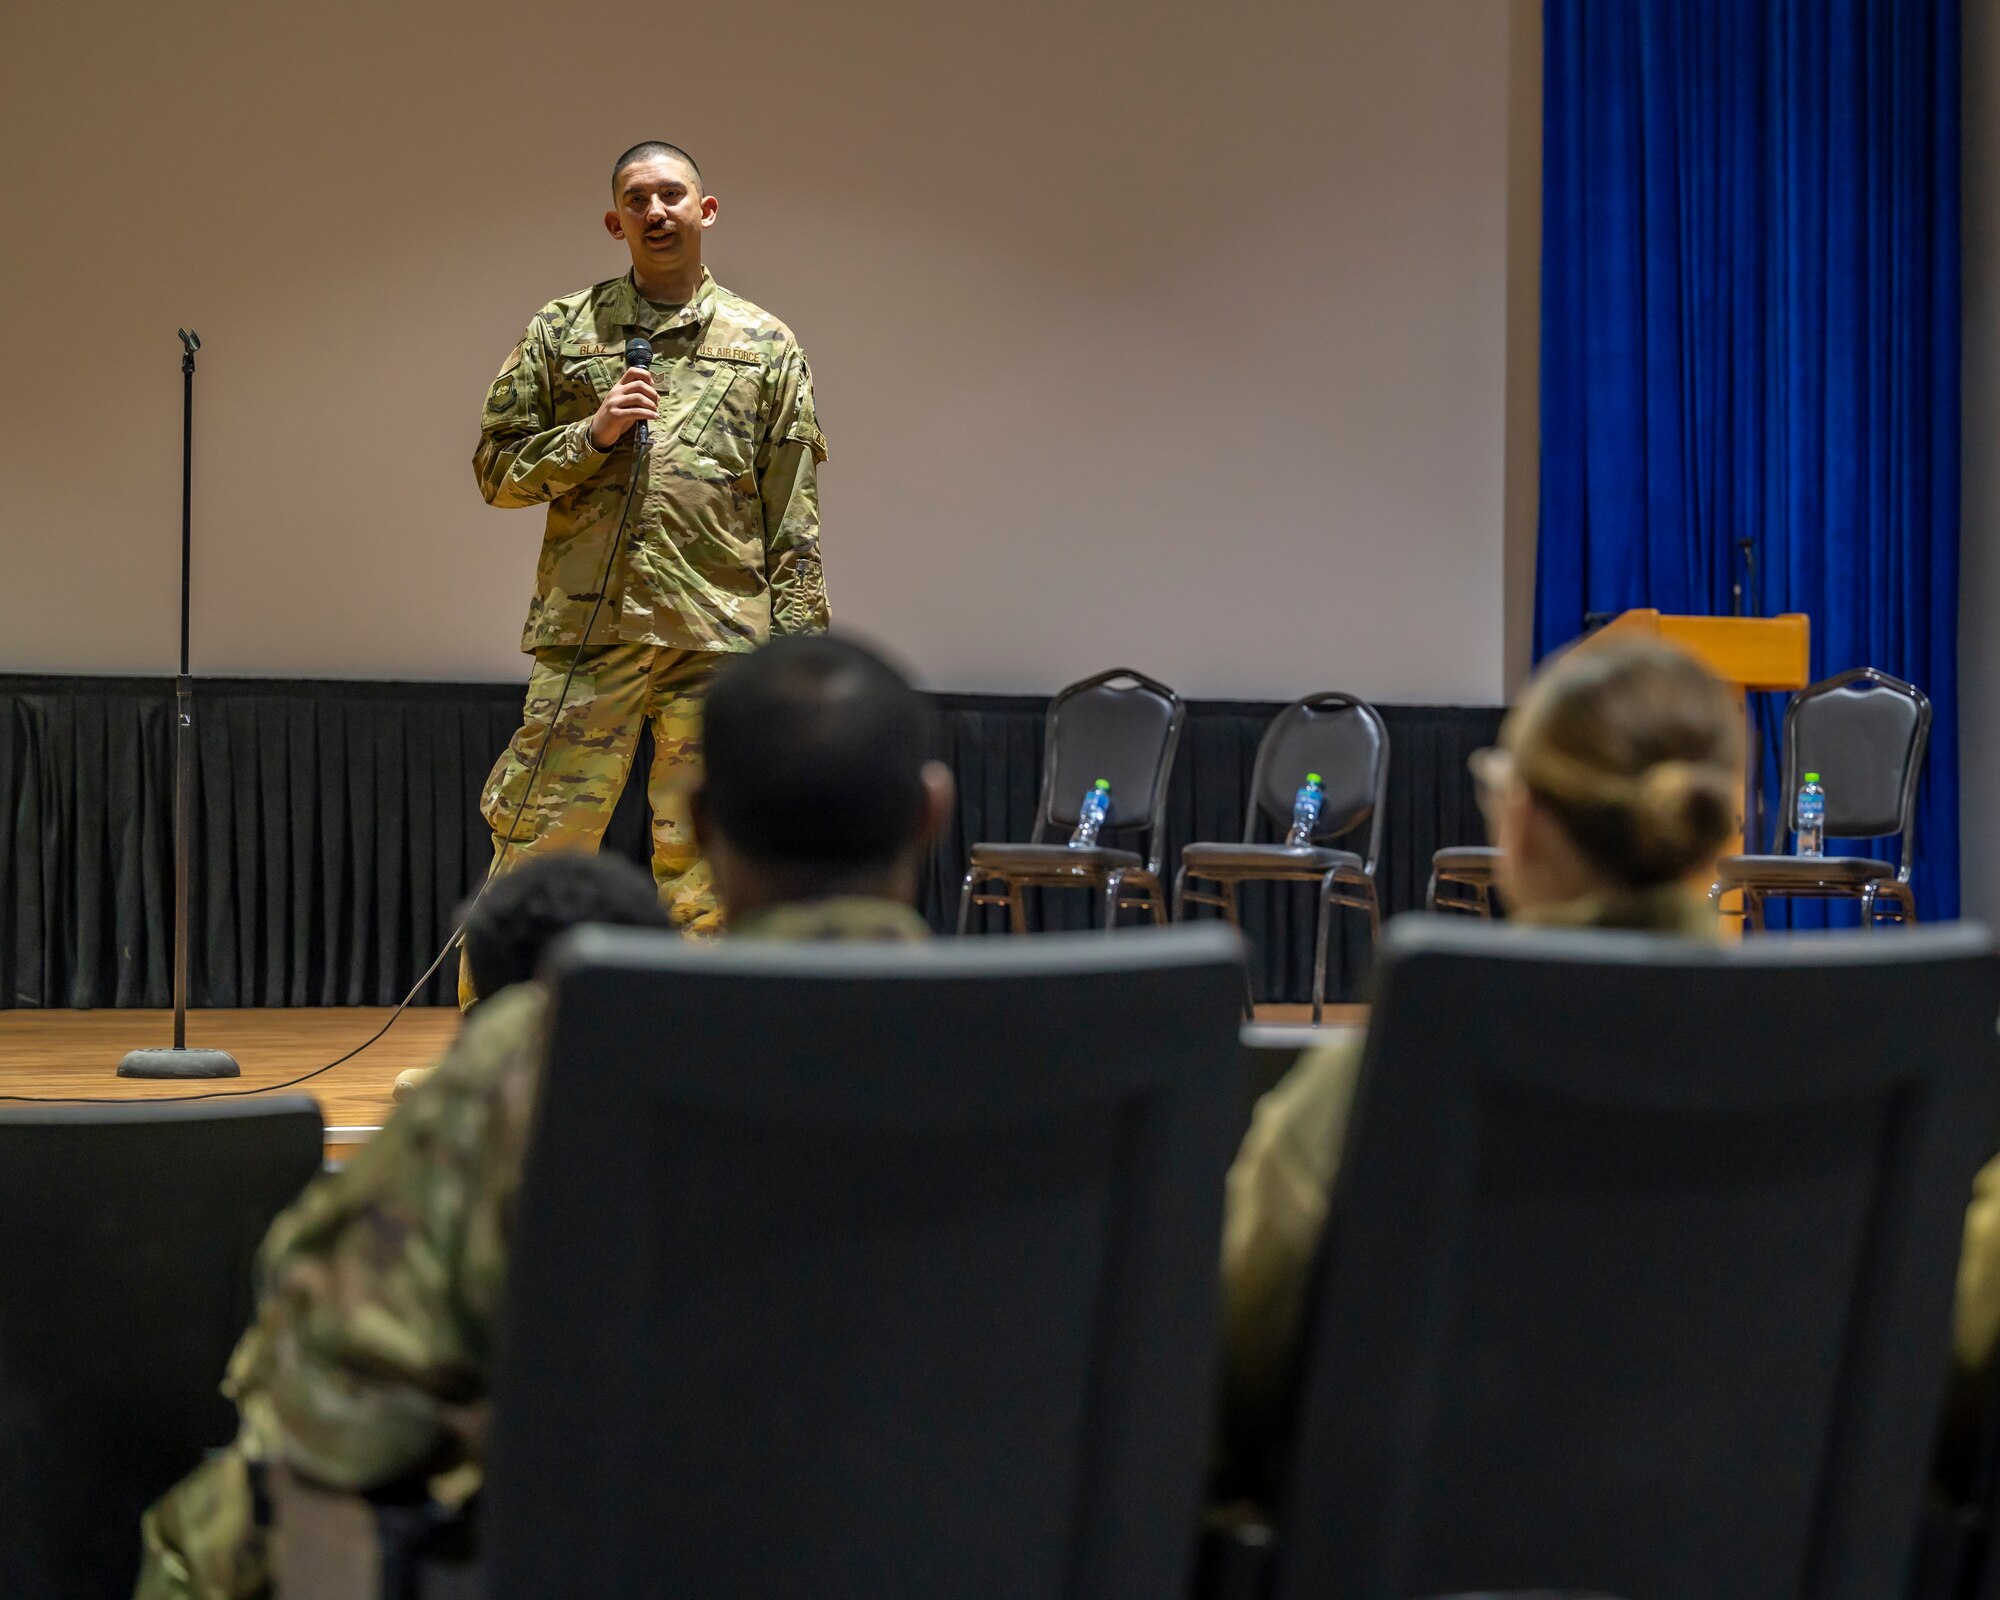 Tech. Sgt. James Blaz, 386th Air Expeditionary Wing Finance paying agent, speaks to service members during a suicide prevention seminar at Ali Al Salem Air Base, Kuwait, Dec. 15, 2021.